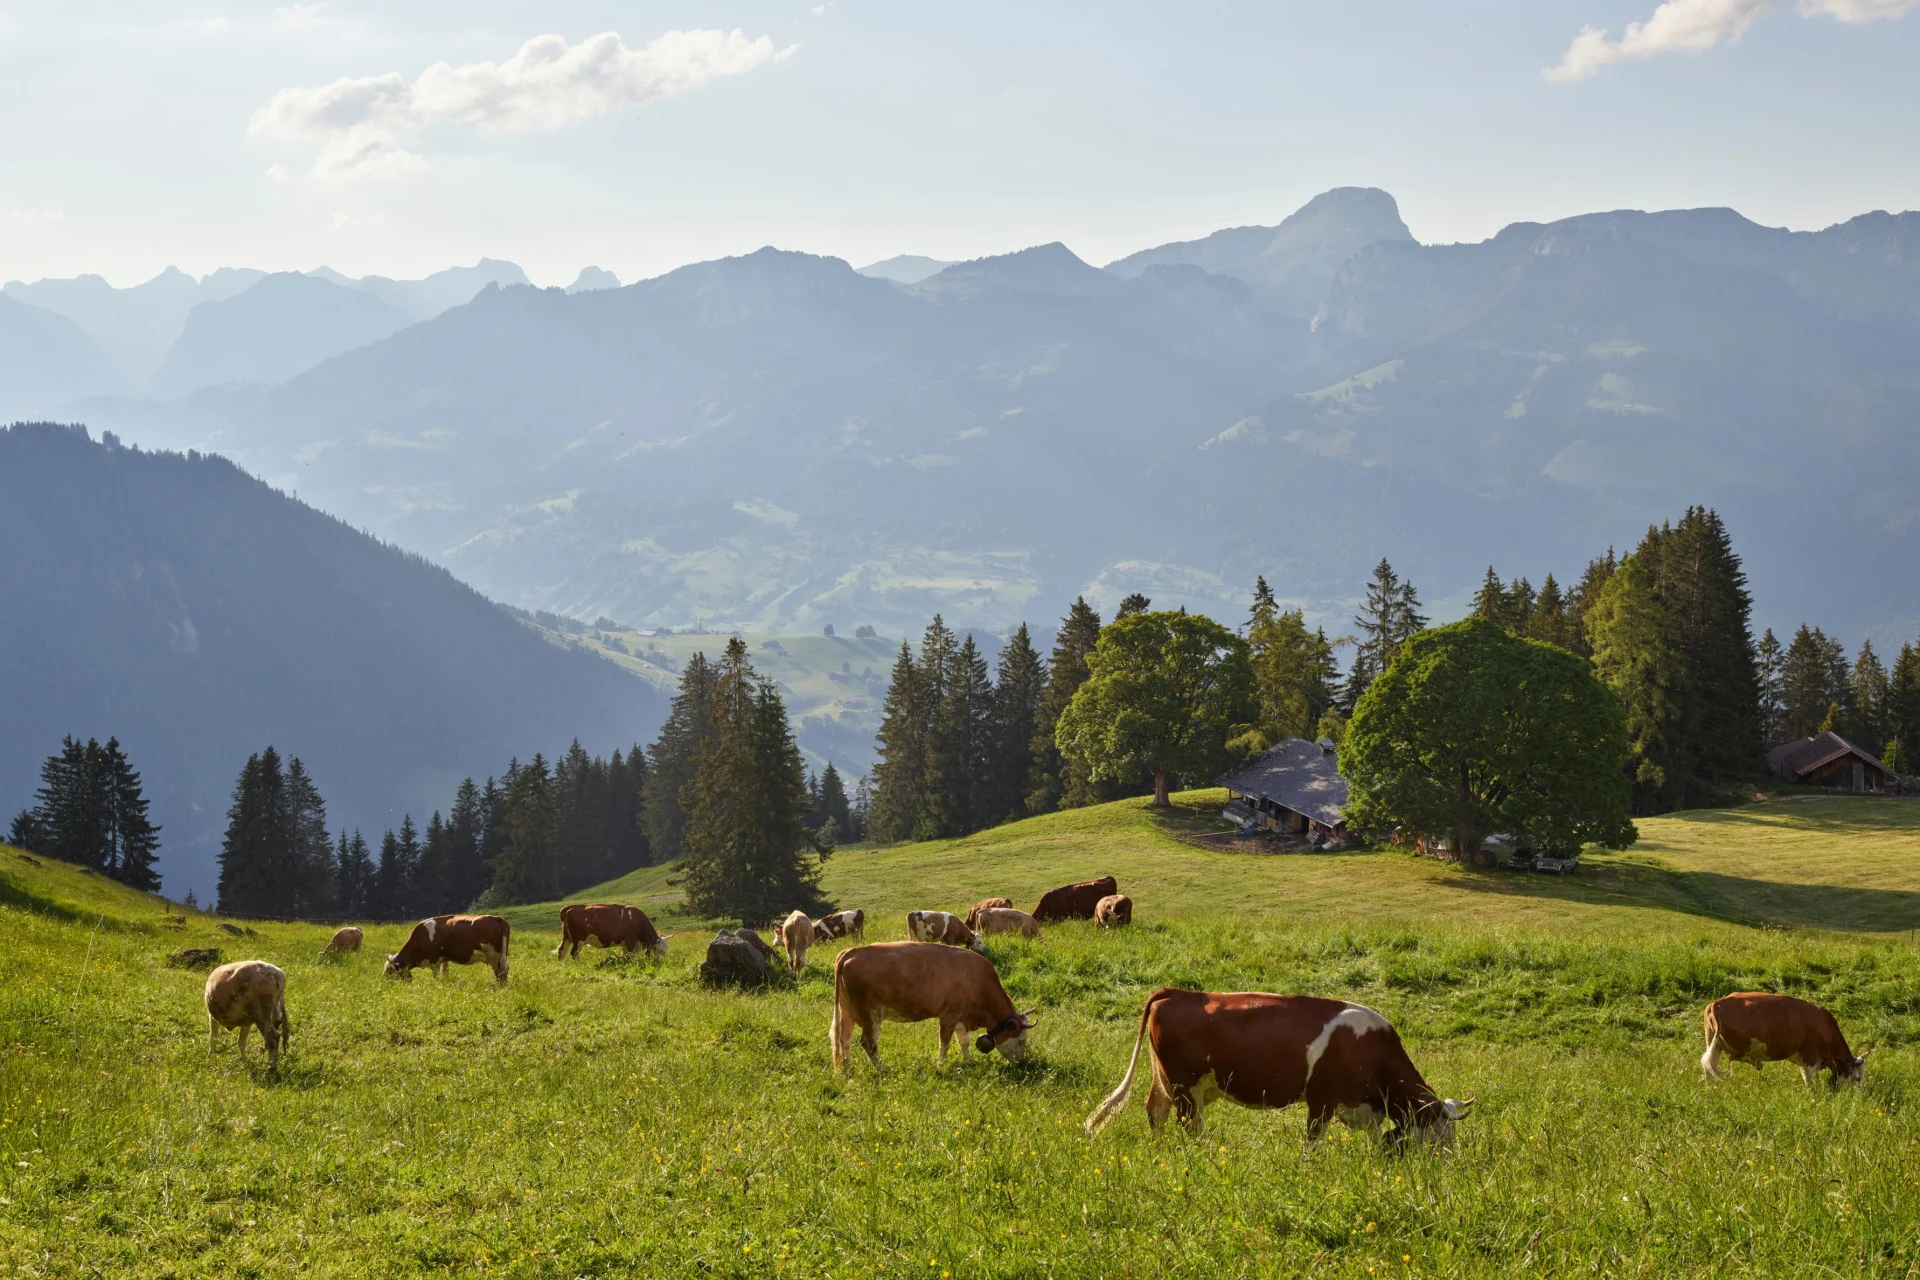 Cows stand in a pasture in the mountains and eat.